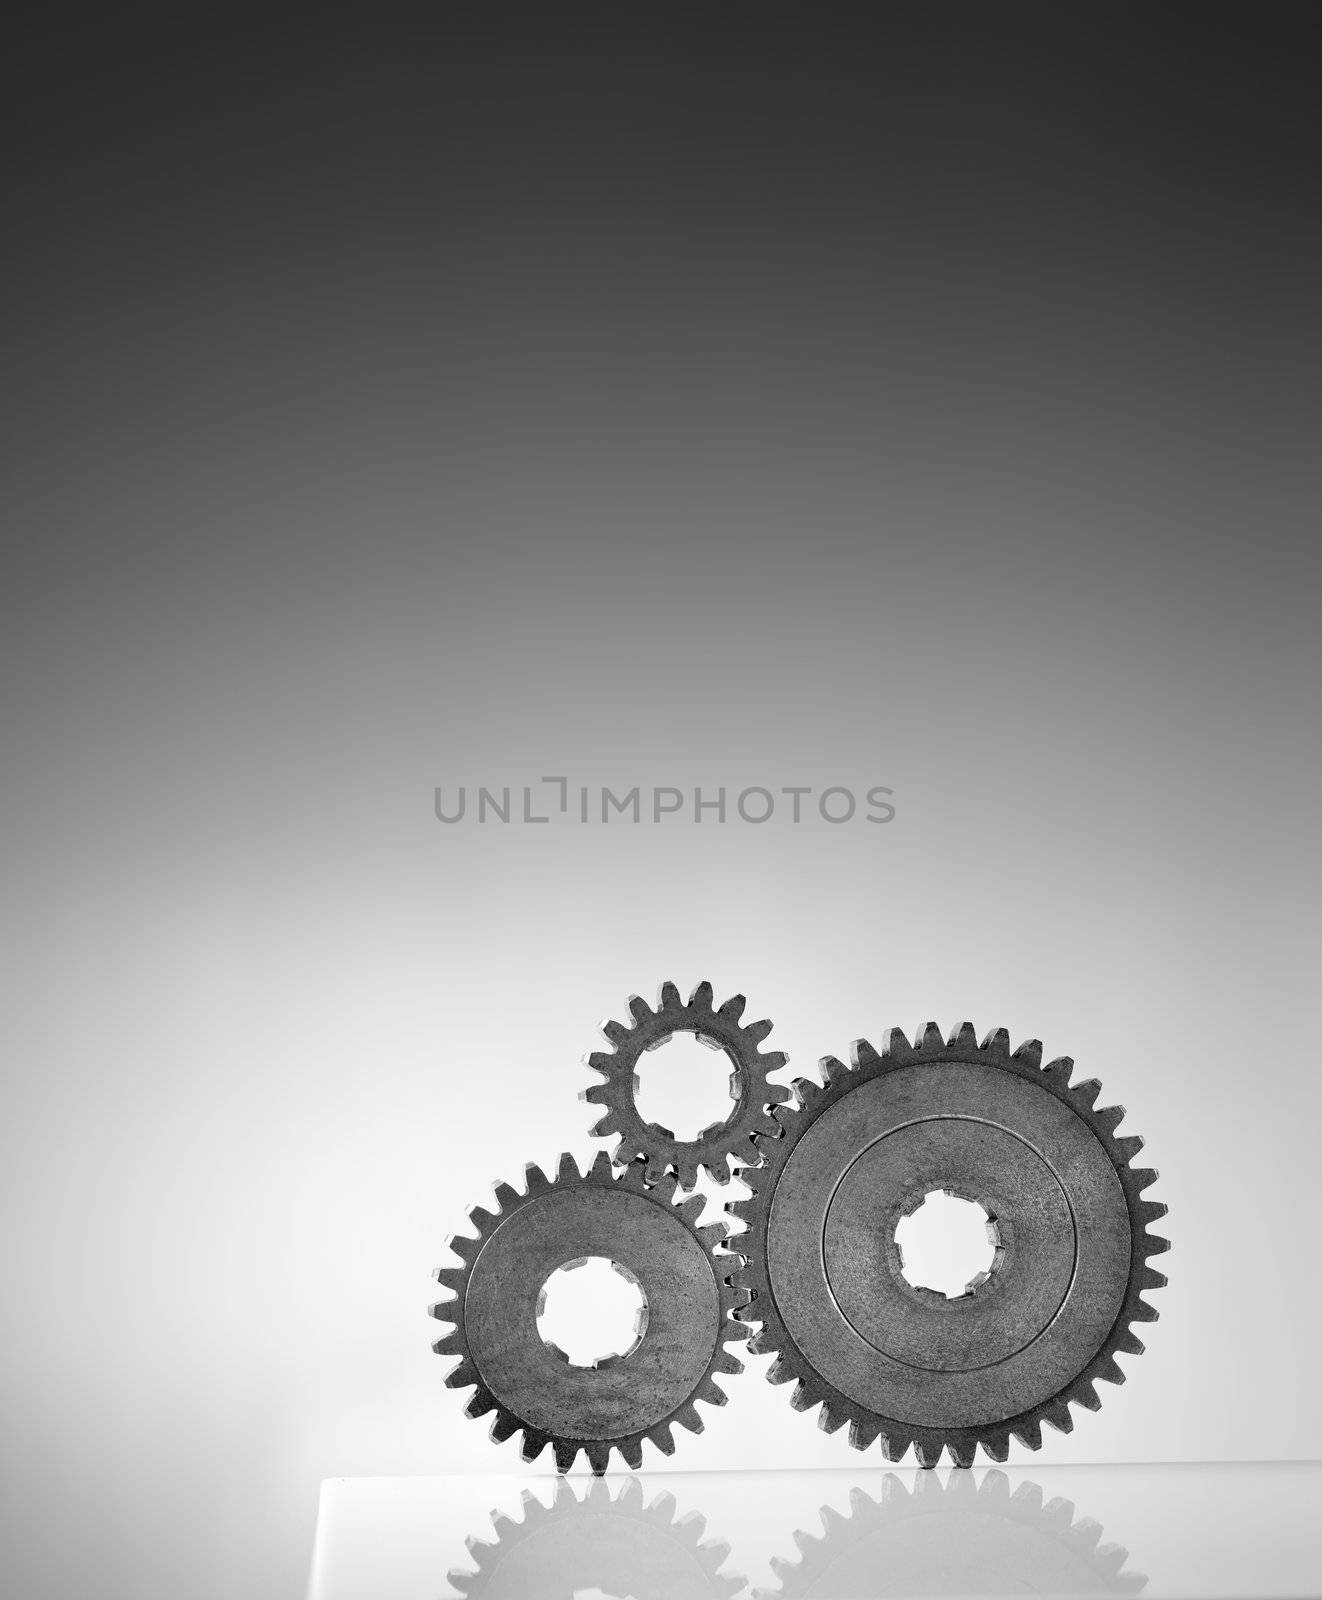 Black and white photograph of three old cog gear wheels.